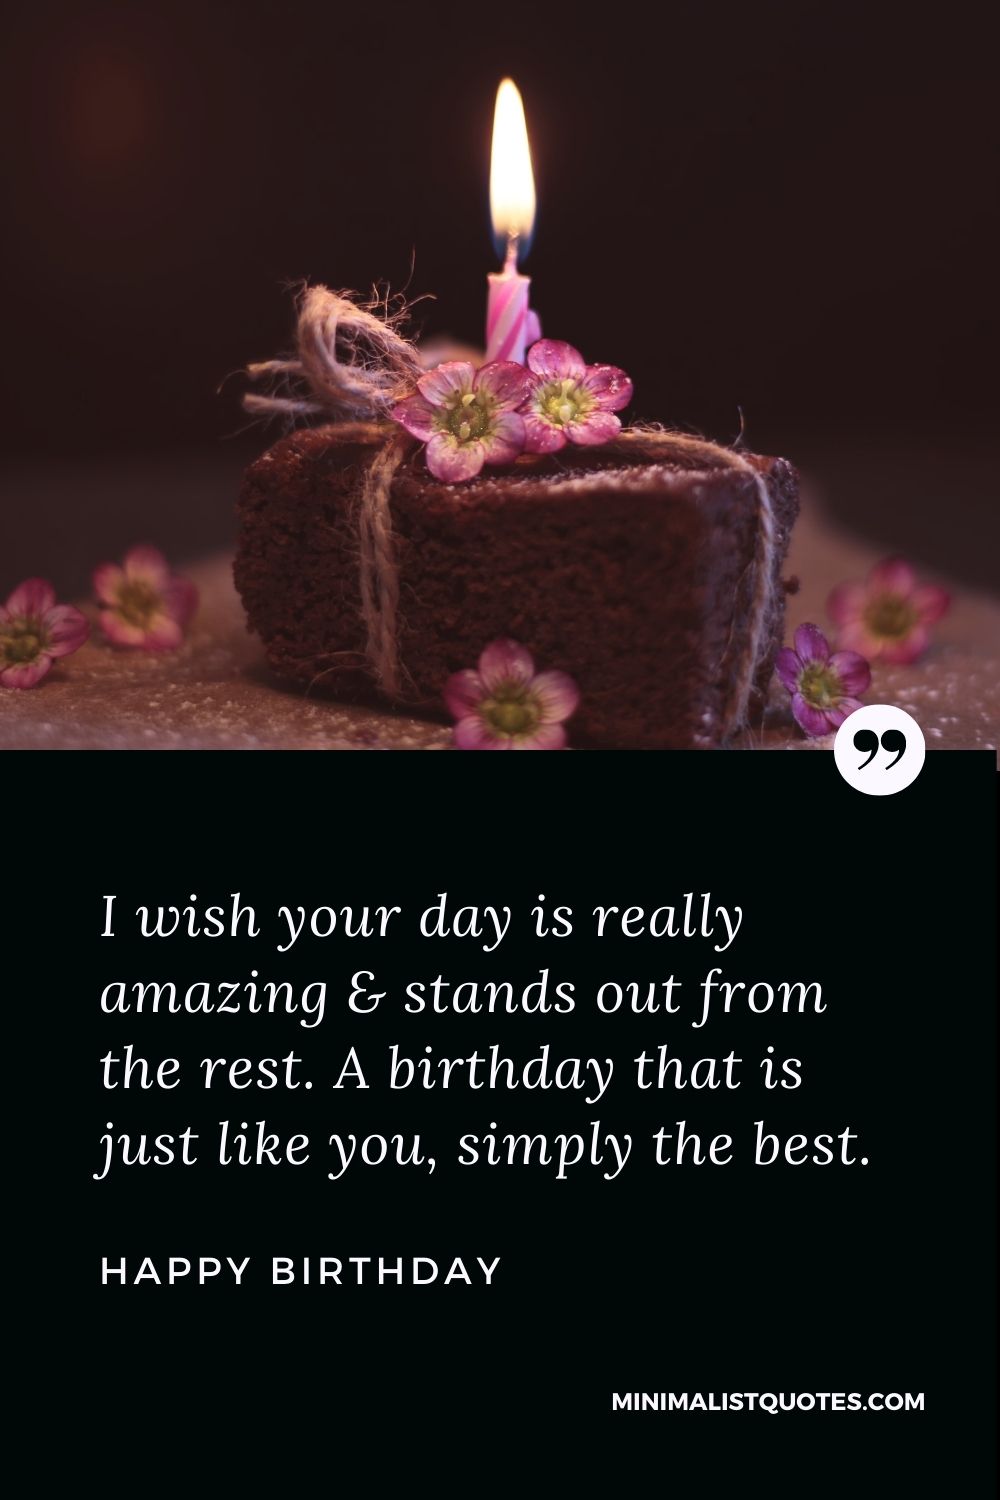 Happy Birthday Wish - I wish your day is really amazing & stands out from the rest. A birthday that is just like you, simply the best.